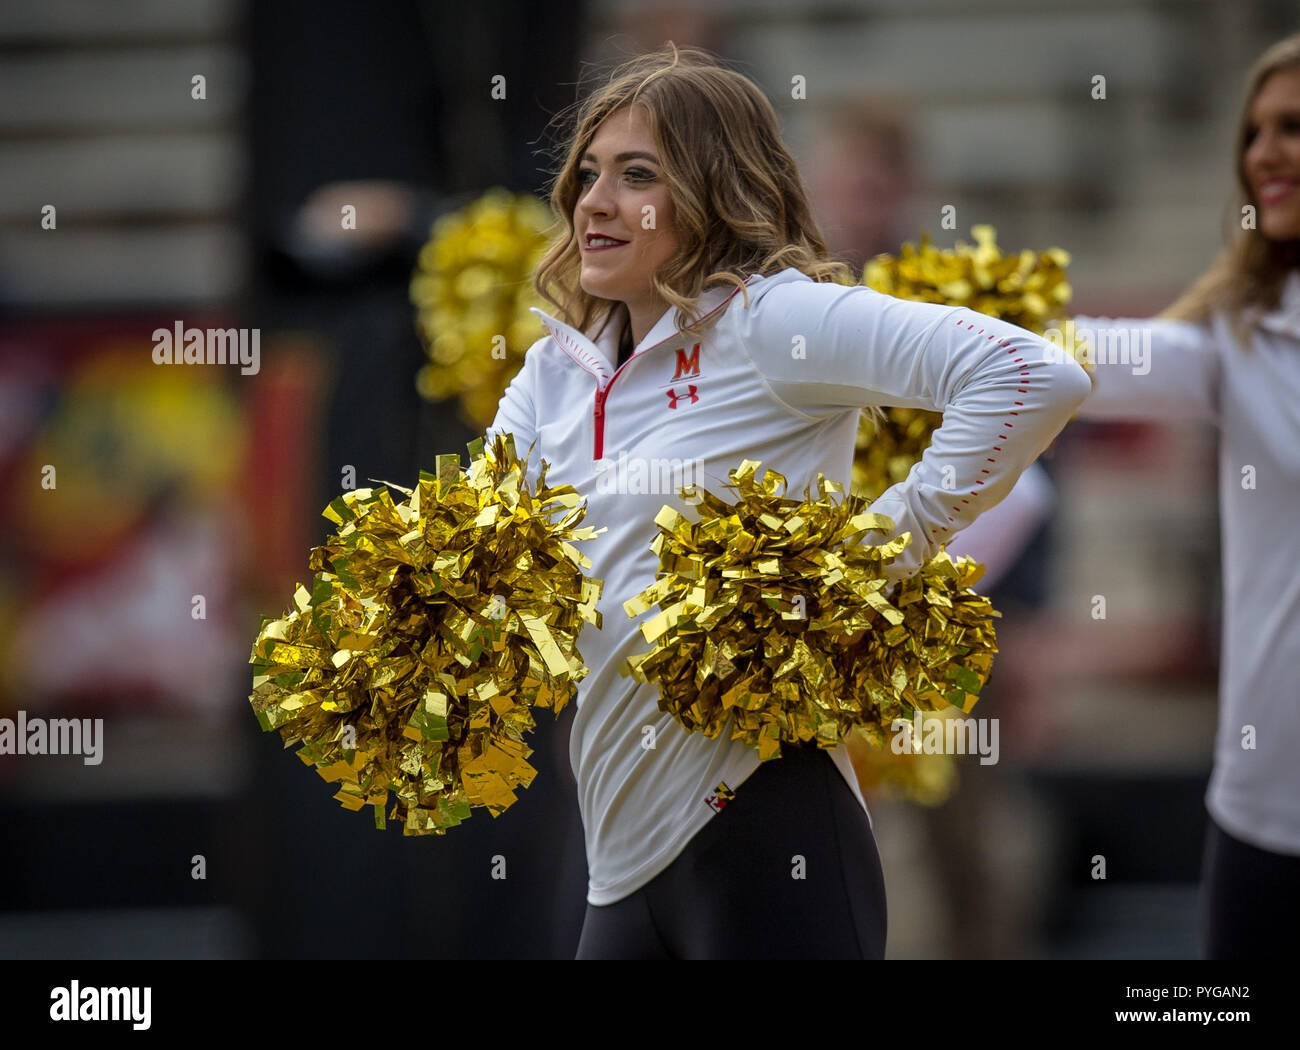 College Park, MD, USA. 27th Oct, 2018. Maryland cheerleader perform in pre-game festivities before the game between Illinois vs. Maryland at Capital One Field in College Park, MD. Cory Royster/Cal Sport Media/Alamy Live News Credit: Cal Sport Media/Alamy Live News Stock Photo